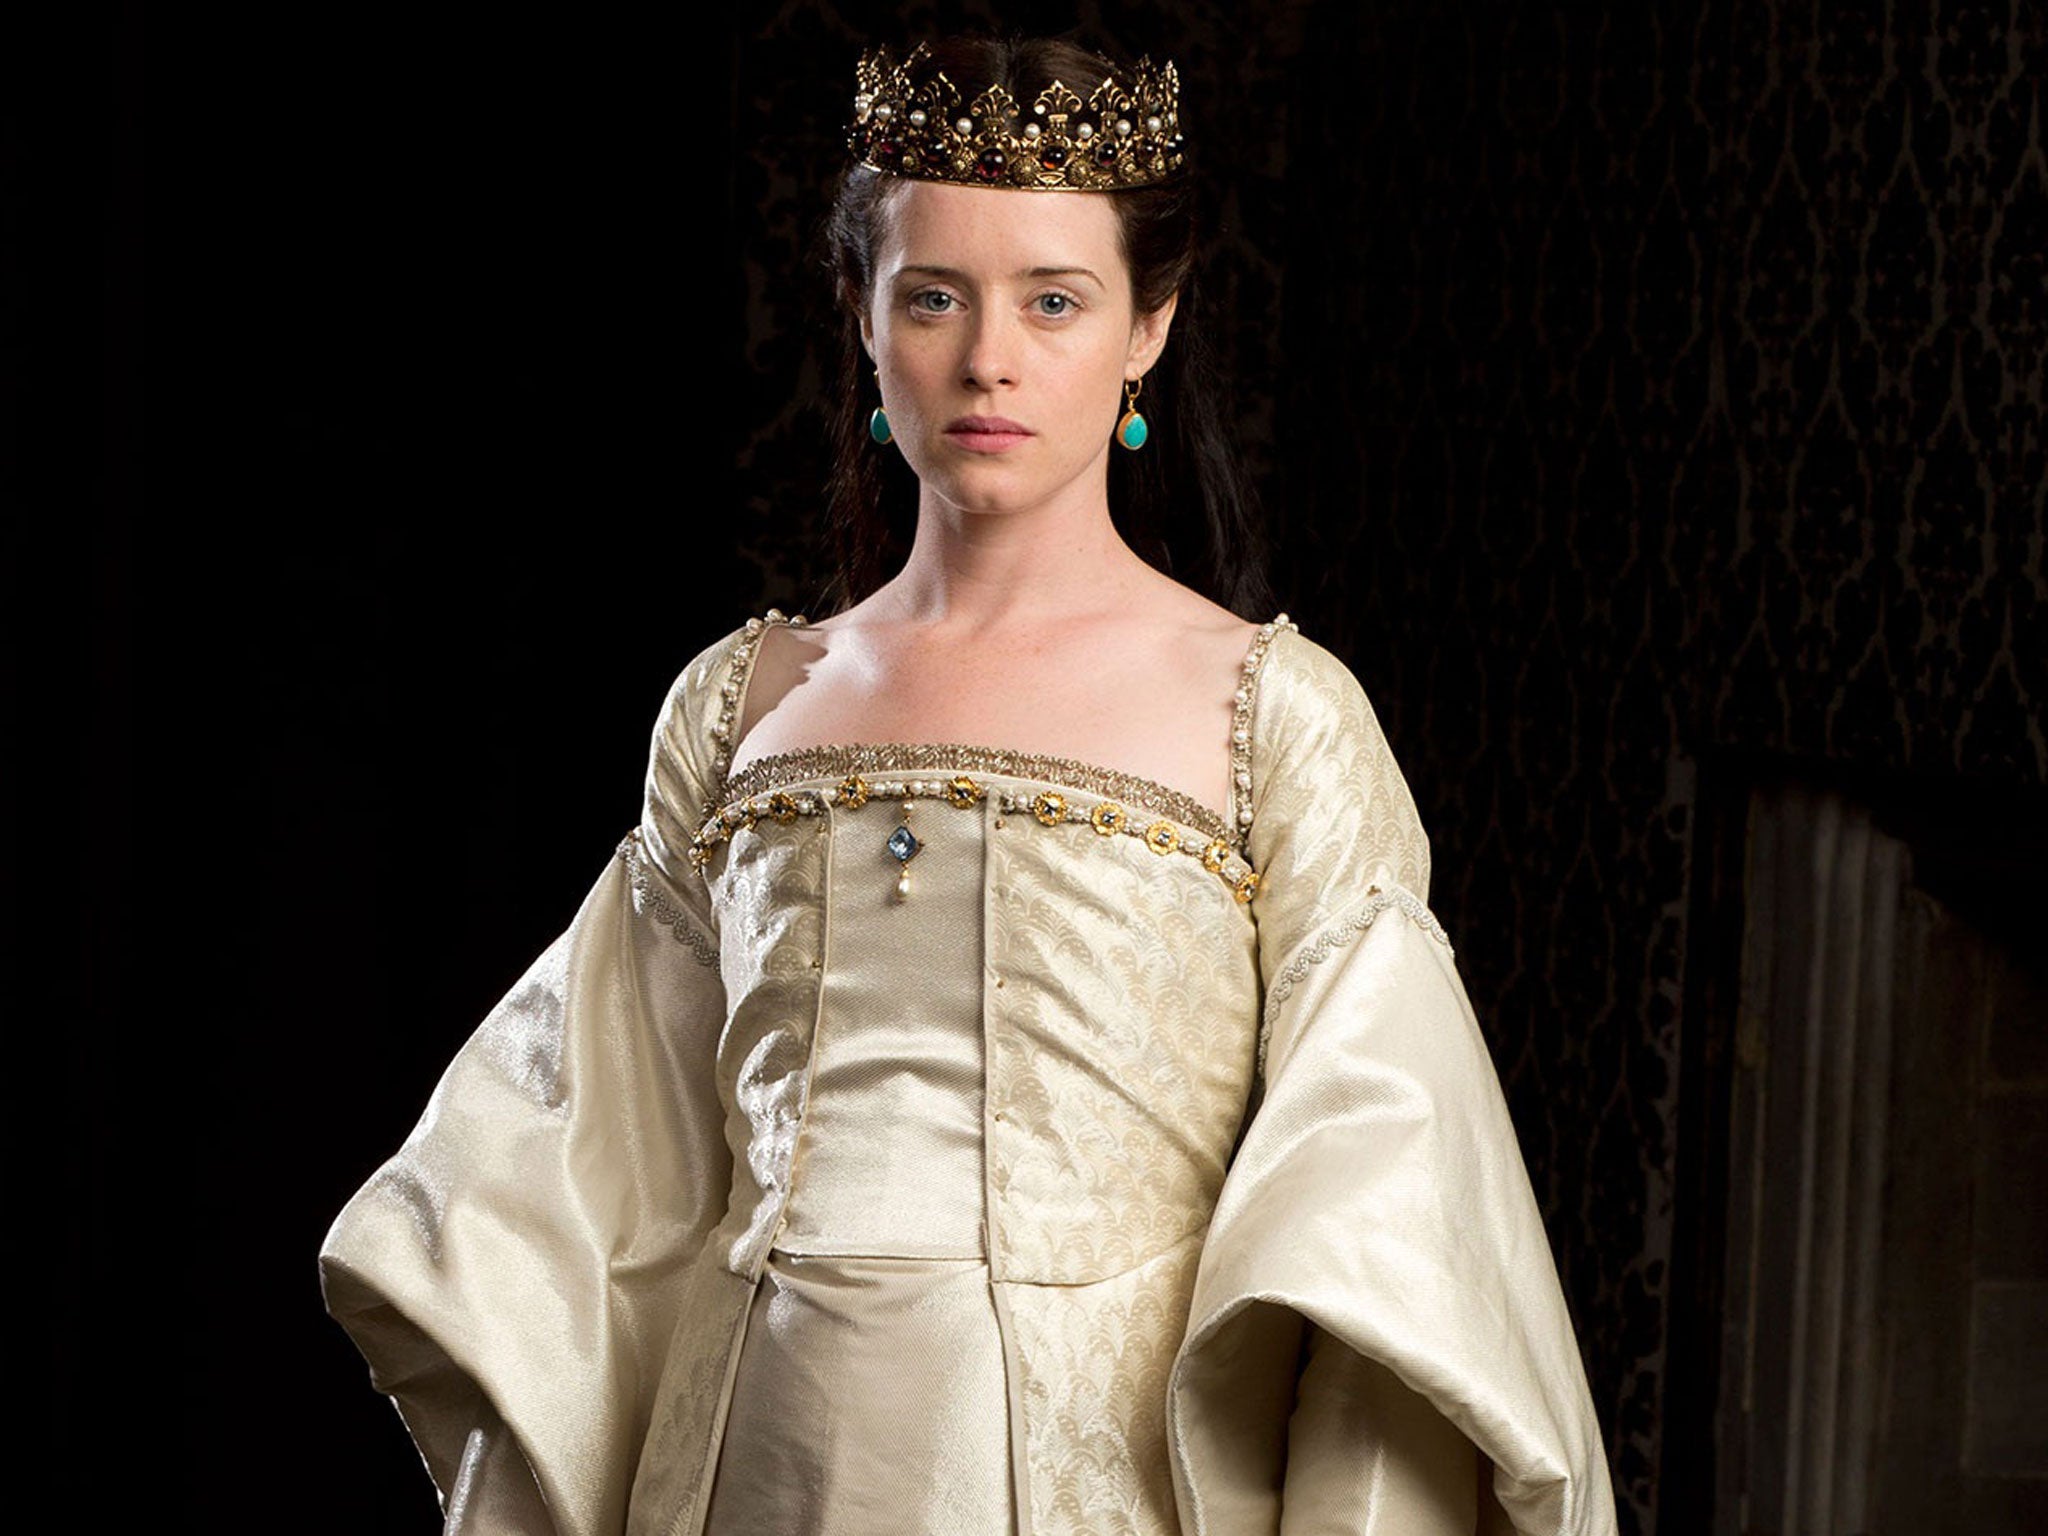 In full regal garb as Henry's second wife